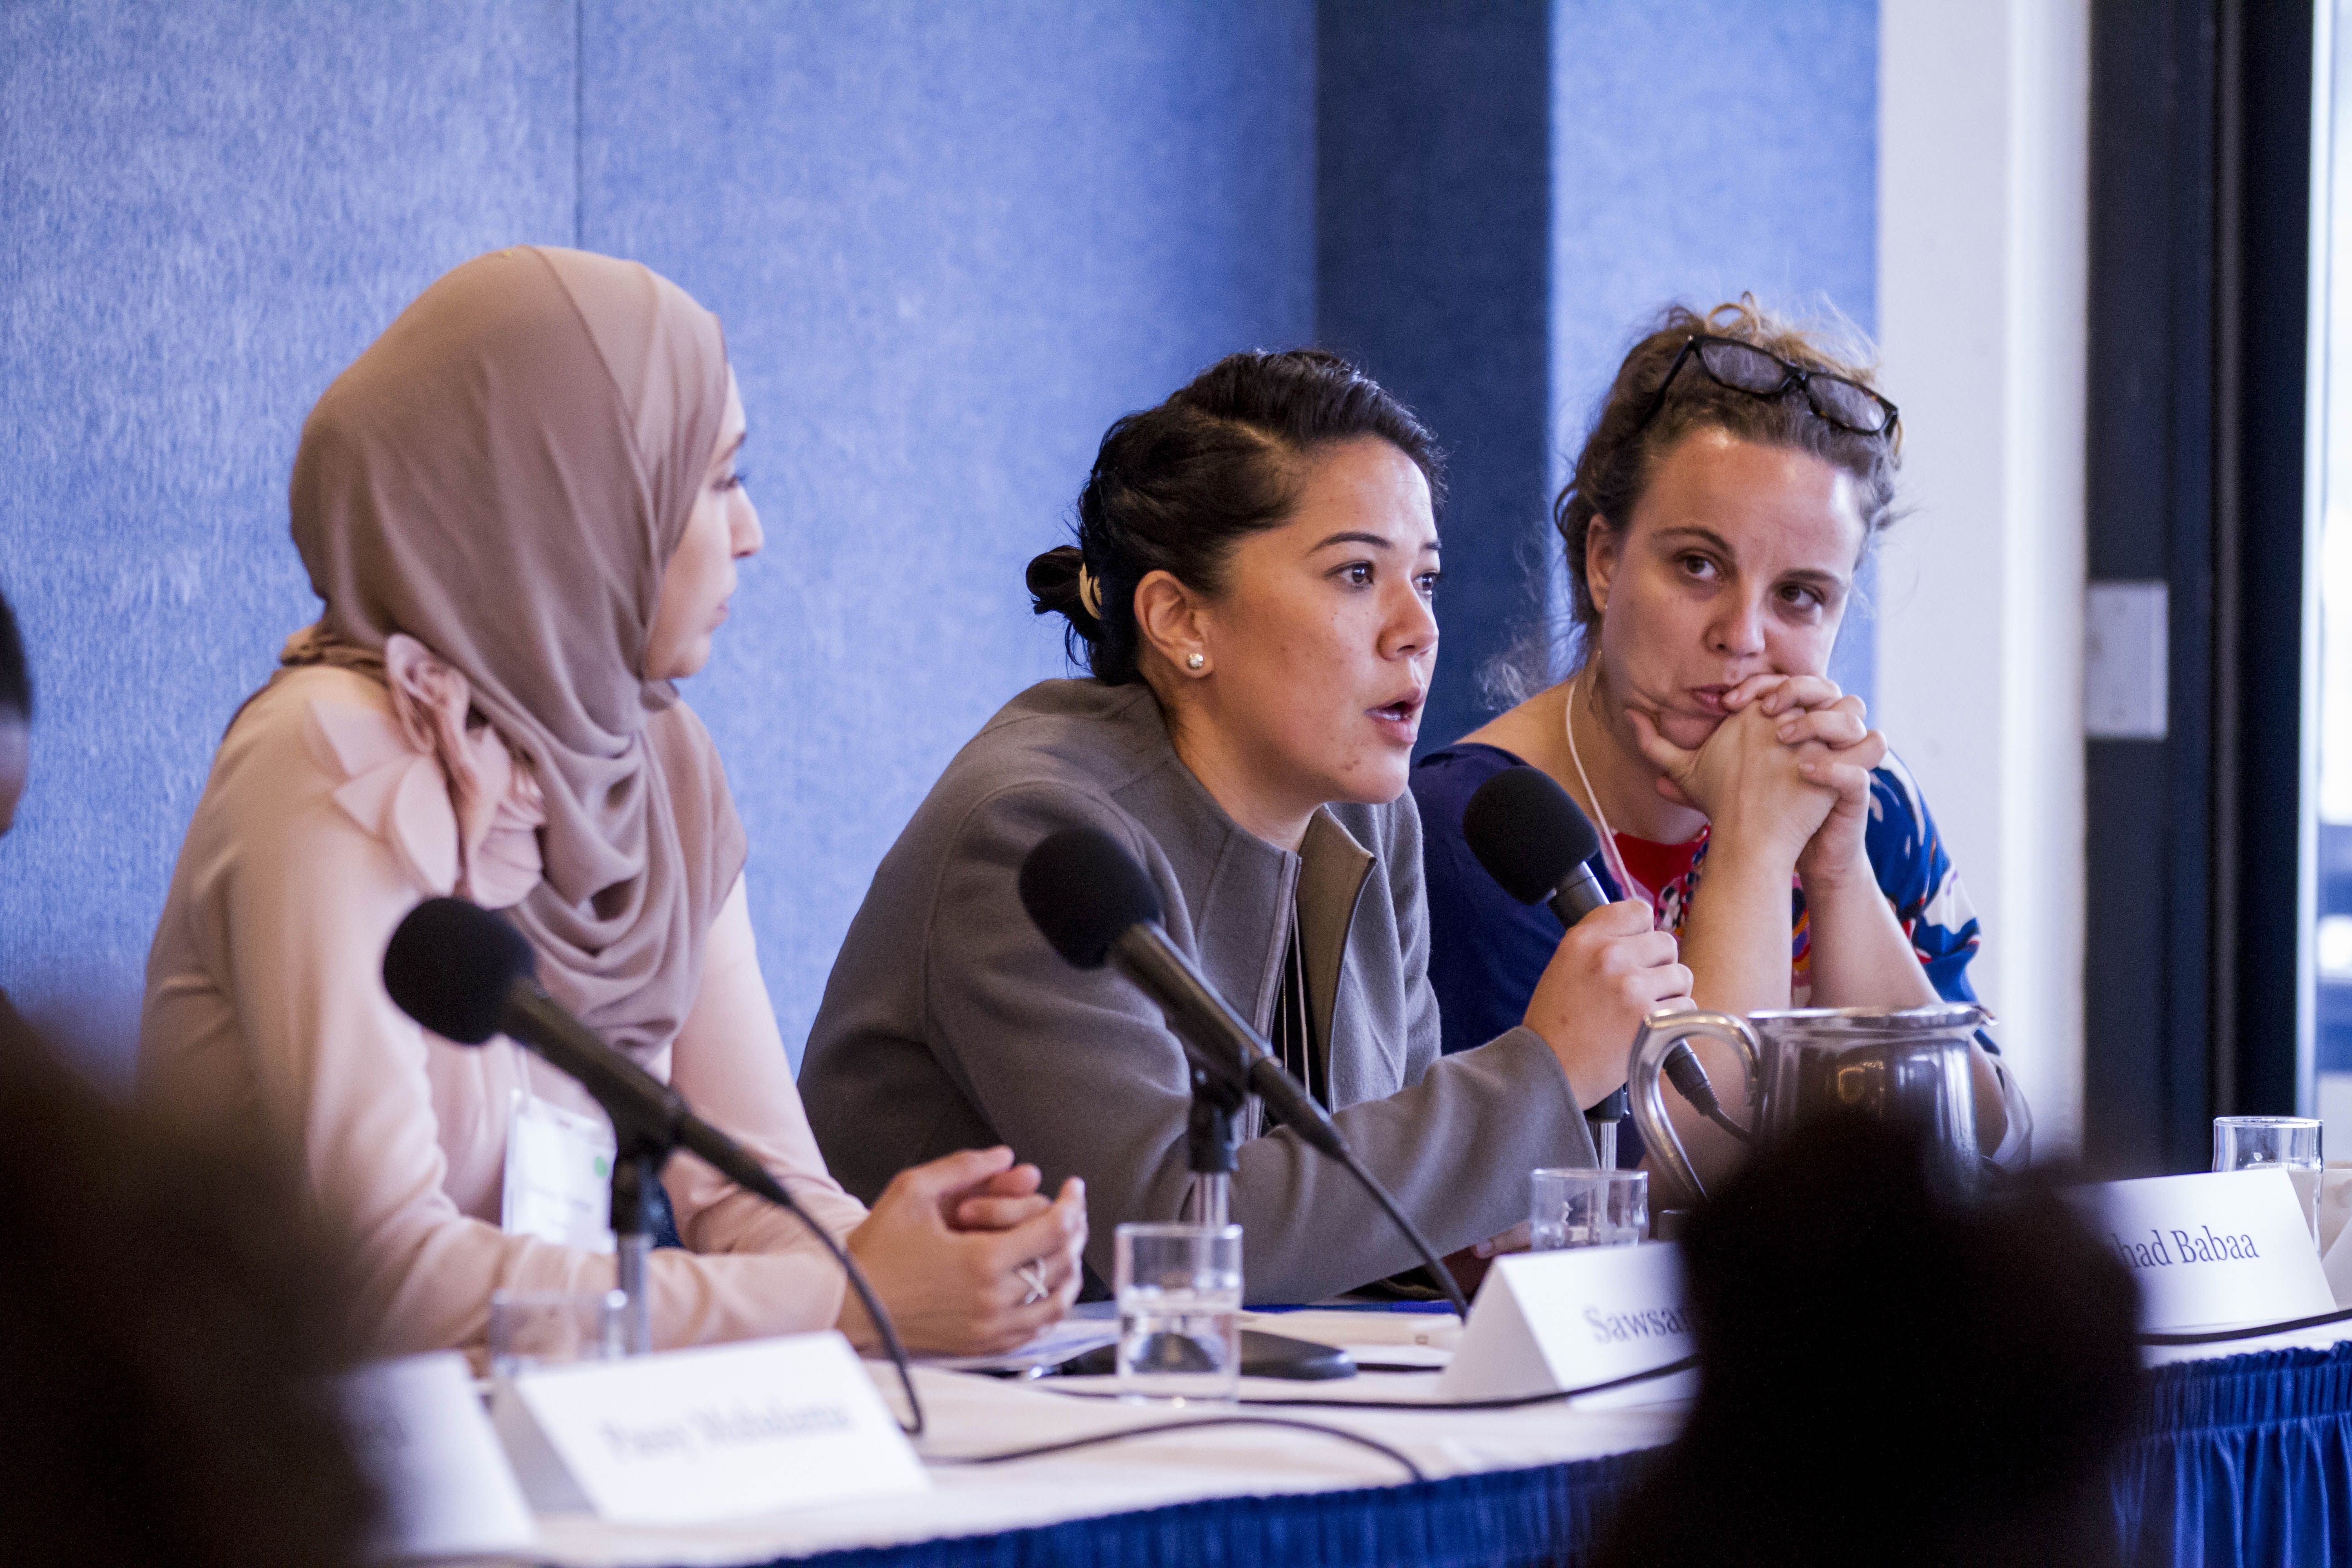 Suhad Babaa, executive director of Just Vision, speaks at a panel on community-level peace building at the "Beyond War" conference. Image by Jin Ding. Washington, D.C., 2018.